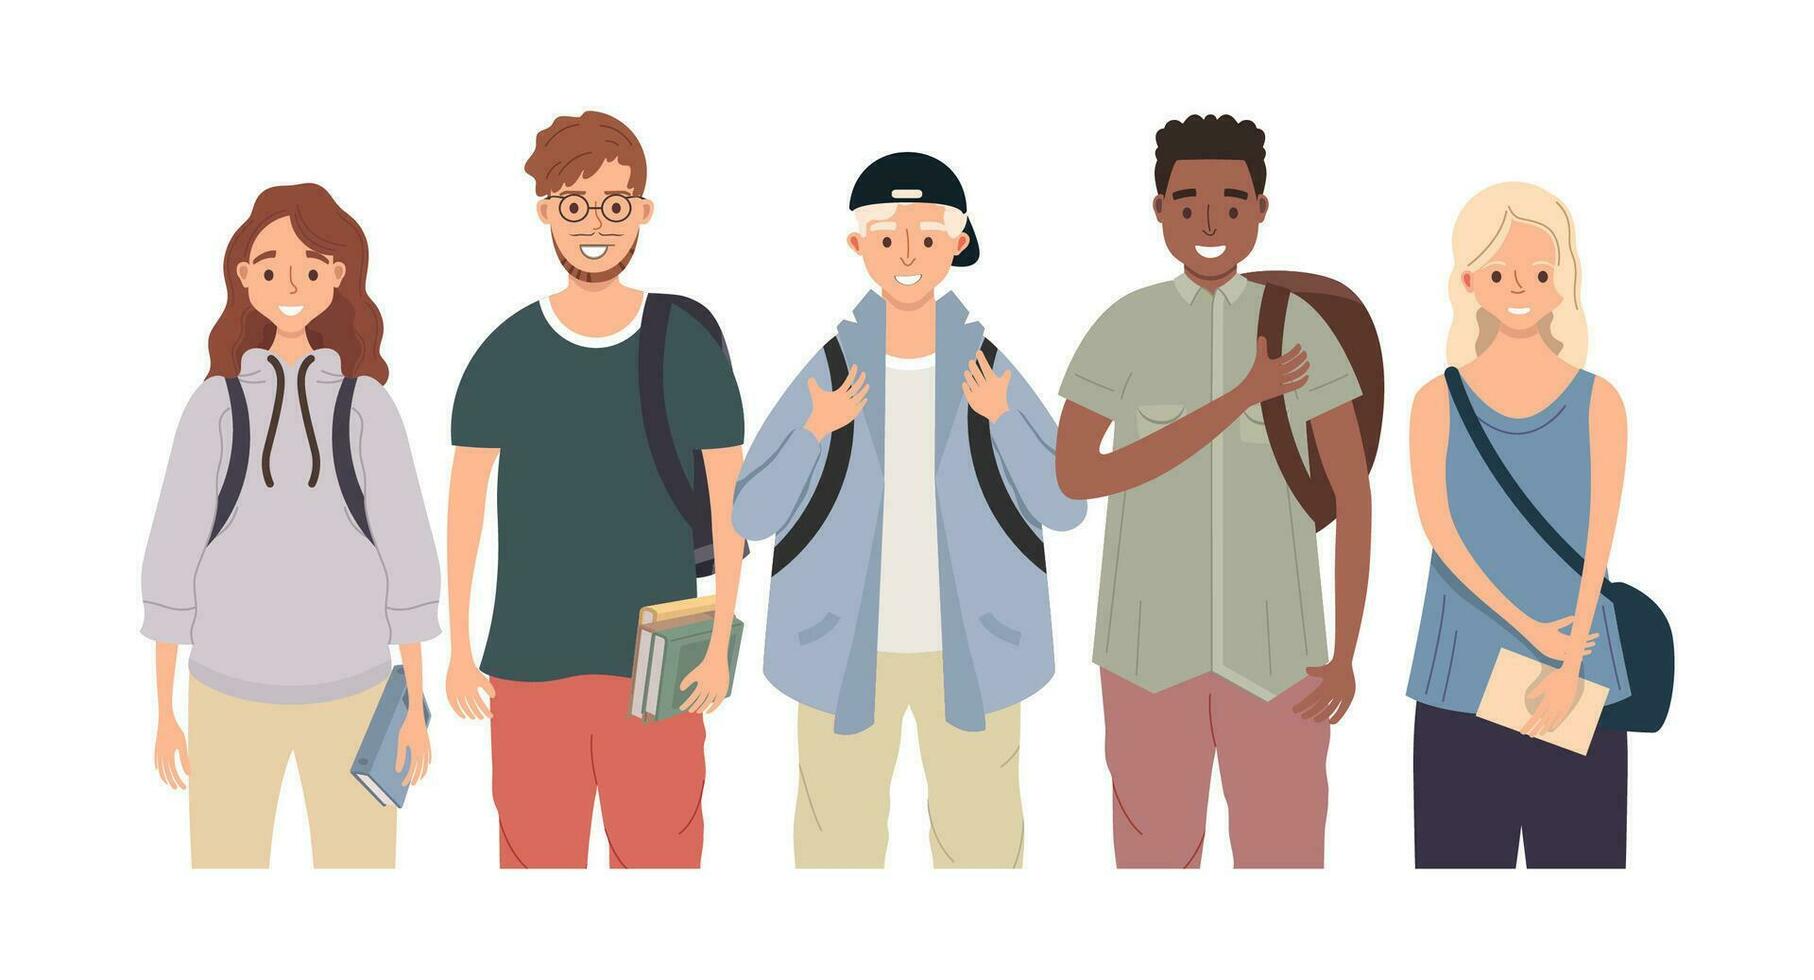 Student group standing together. Young people with backpacks and books. Diverse college classmates in casual clothes. Youth lifestyle concept vector